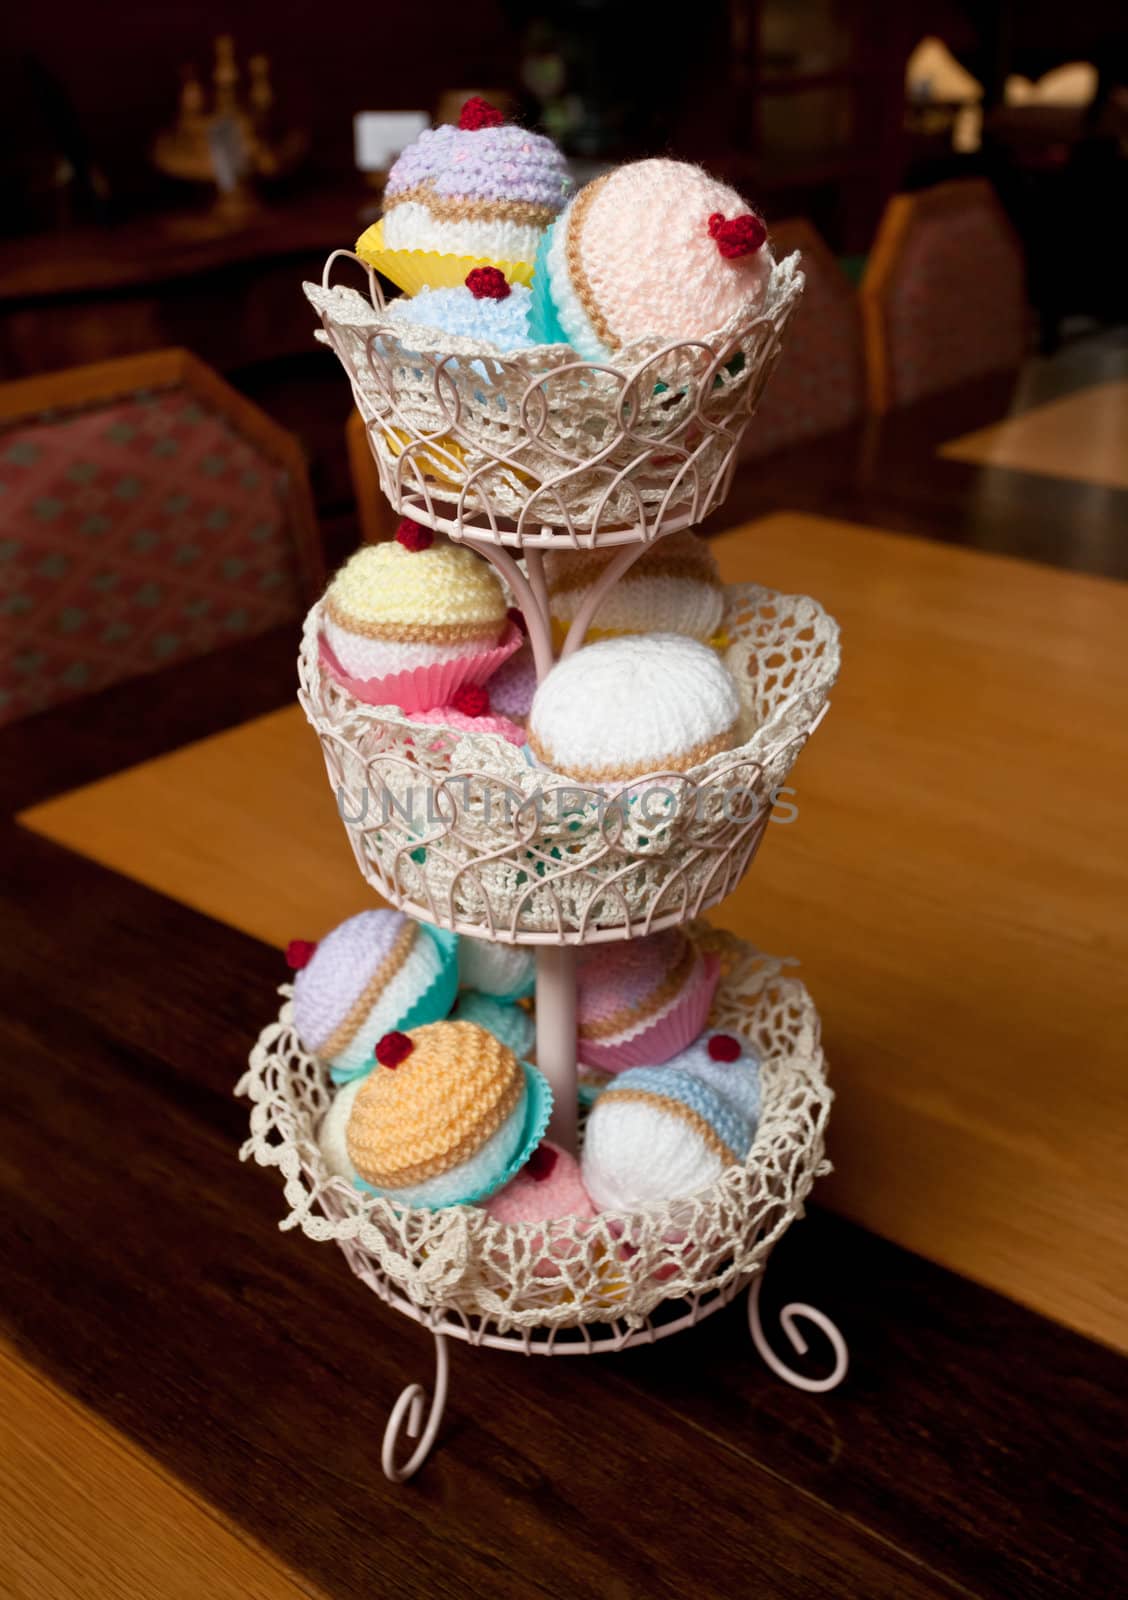 Knitted cupcakes by steheap